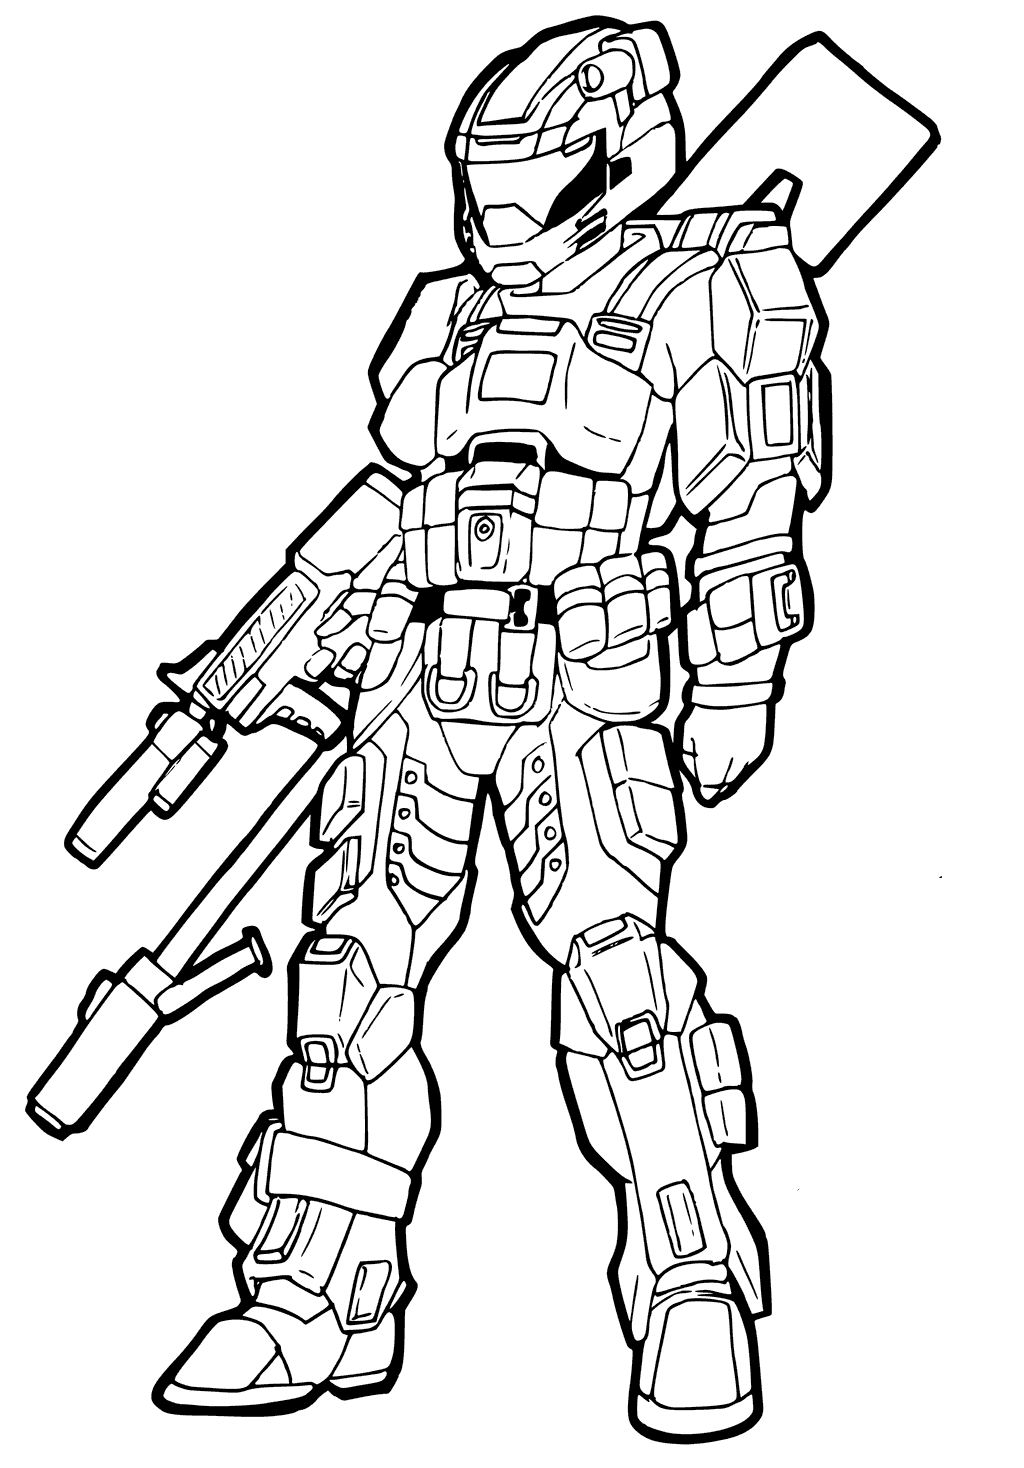 Halo 5 Coloring Pages Free download on ClipArtMag